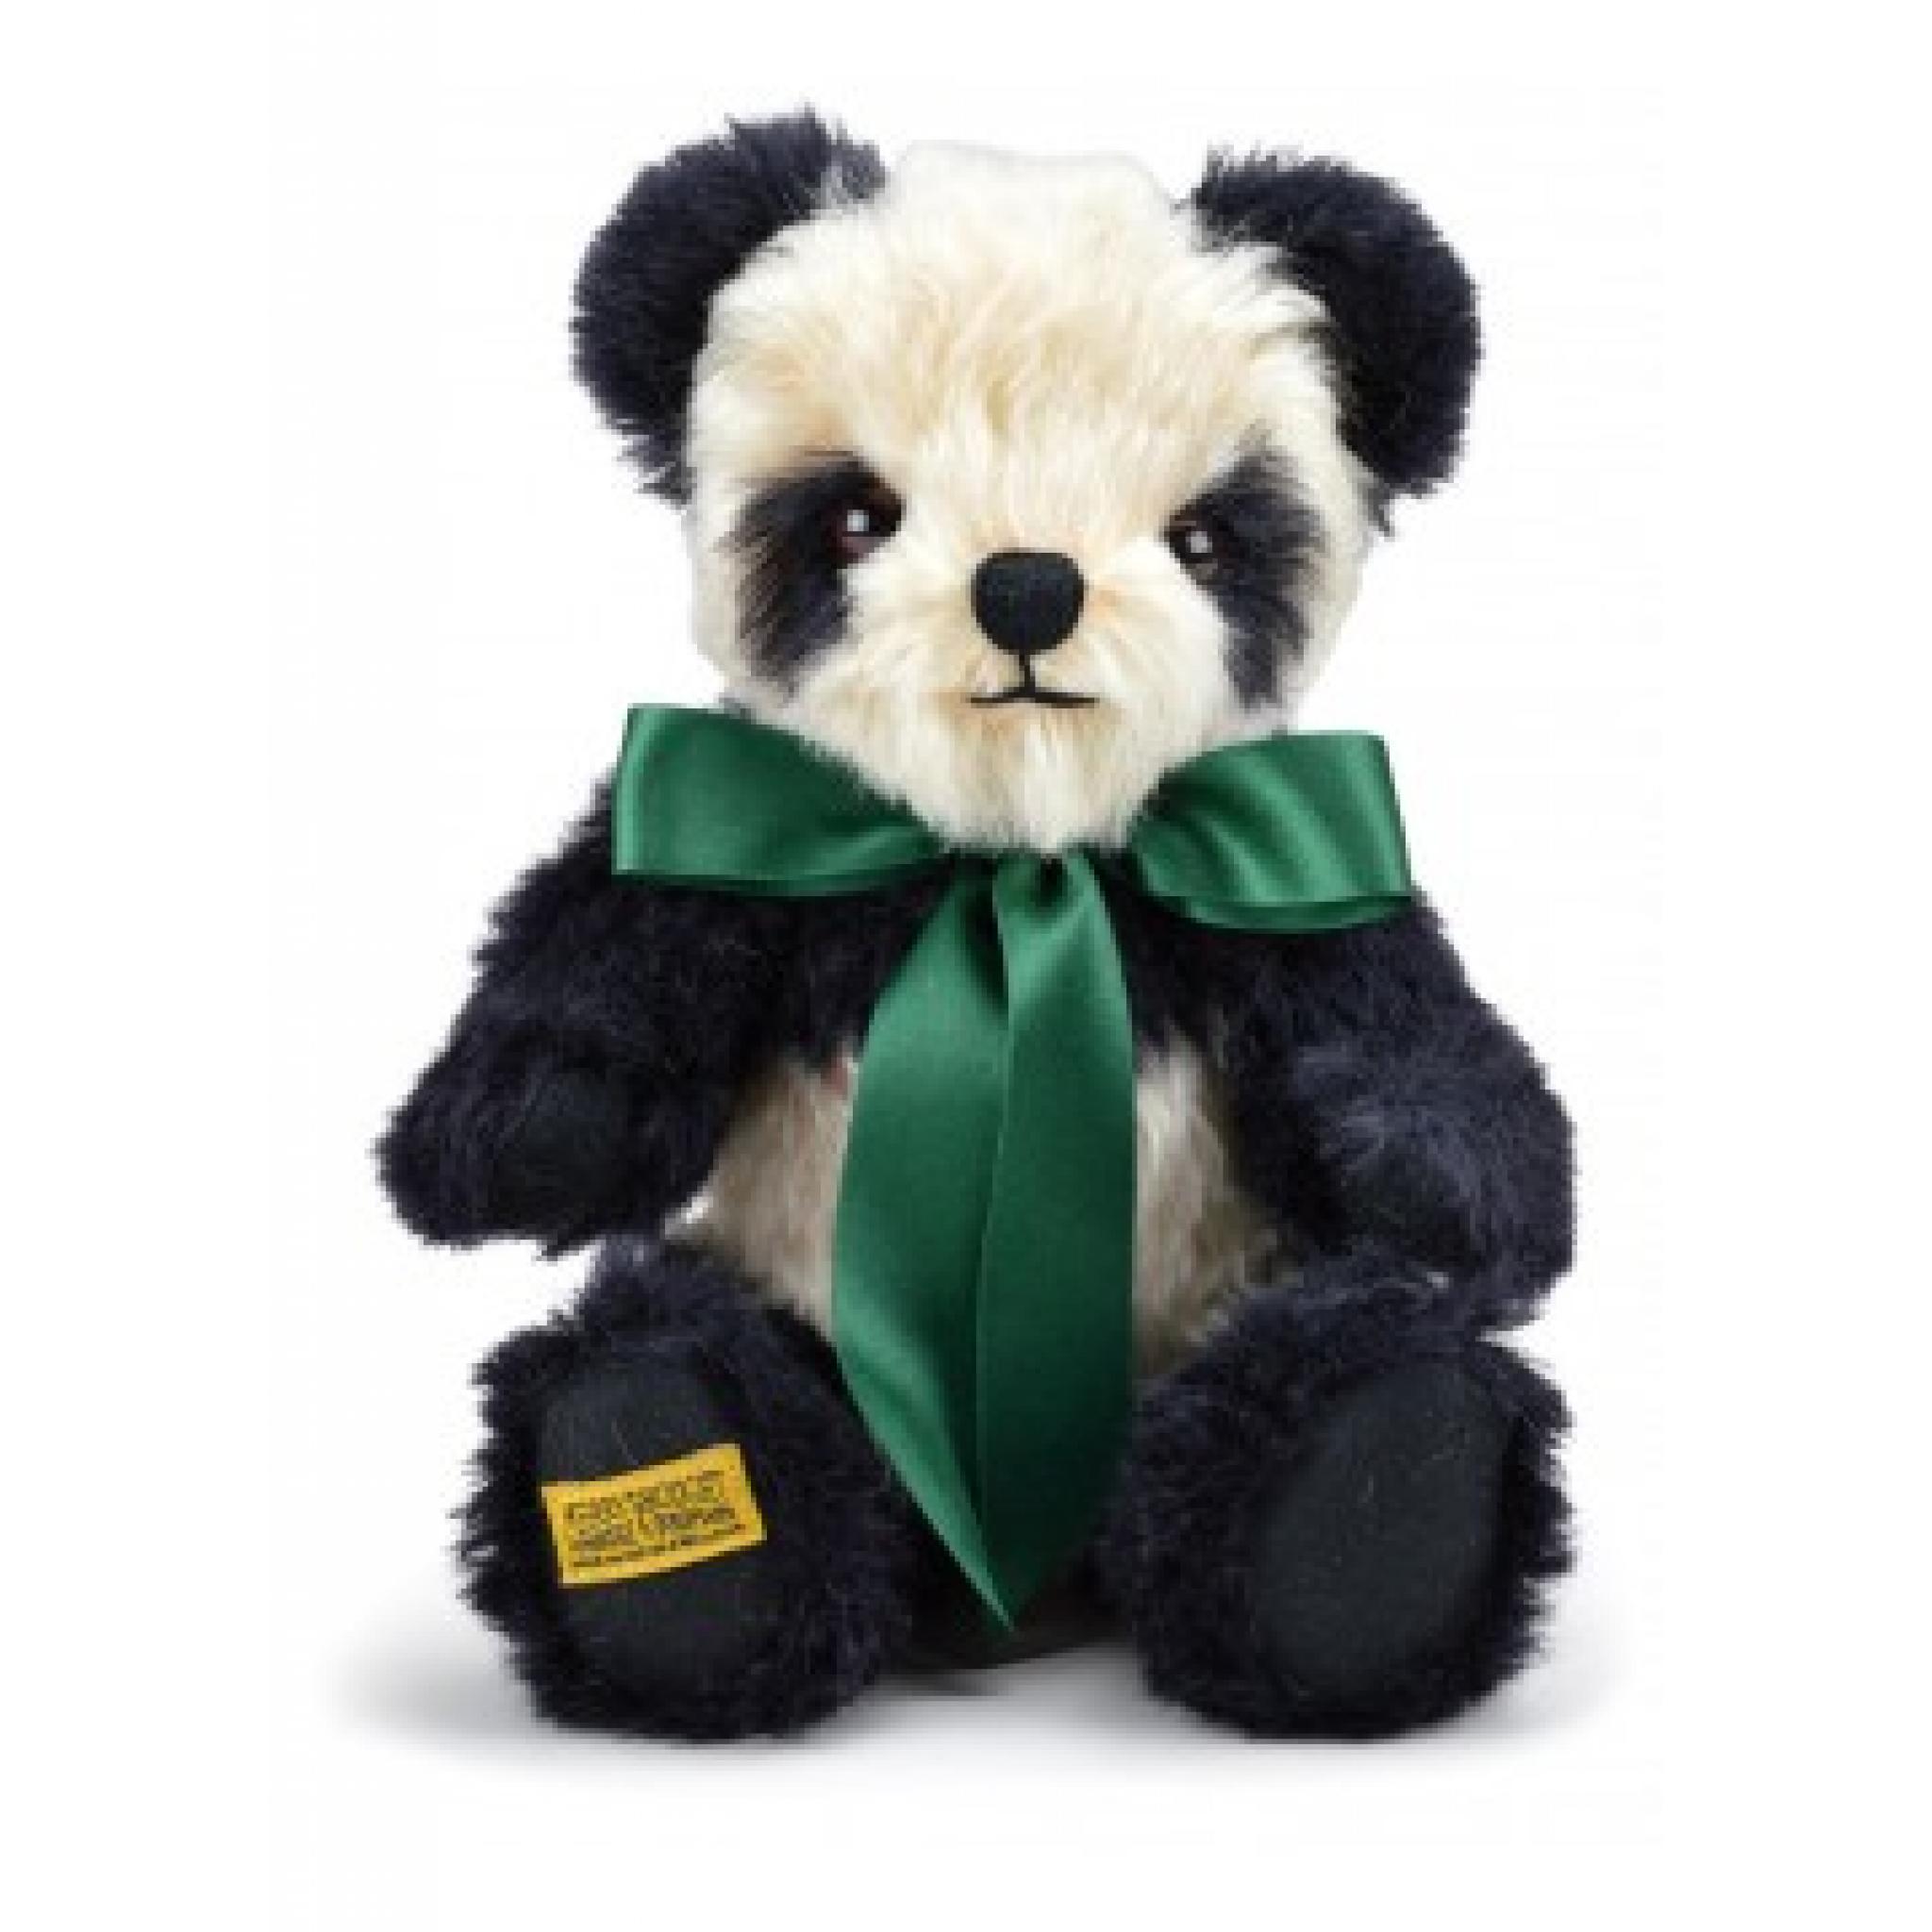 Antique Panda Merrythought Traditional Teddy Bear 10 inch | Sidmouth Gifts